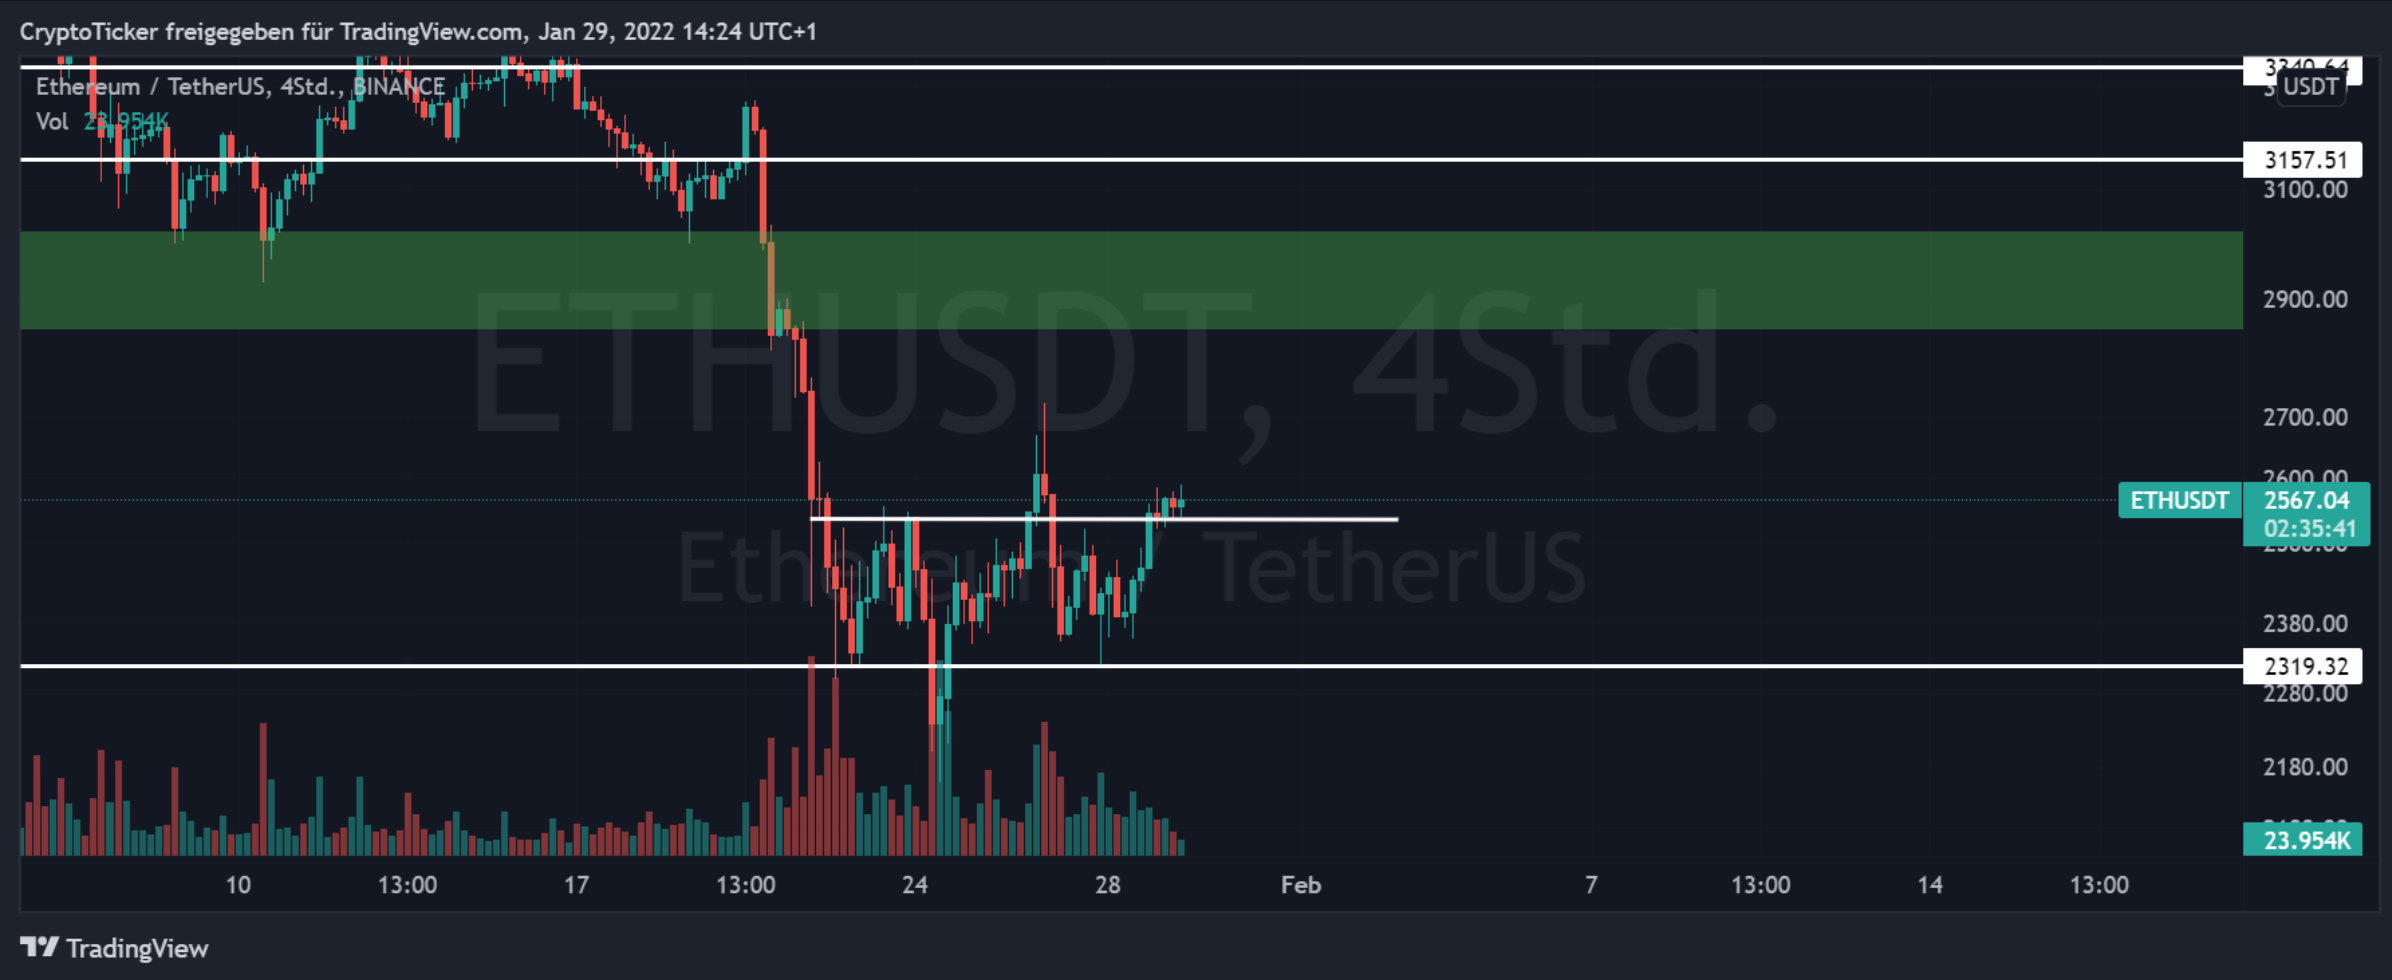 ETH/USDT 4-hours chart showing the upward breakout in Ethereum Price 